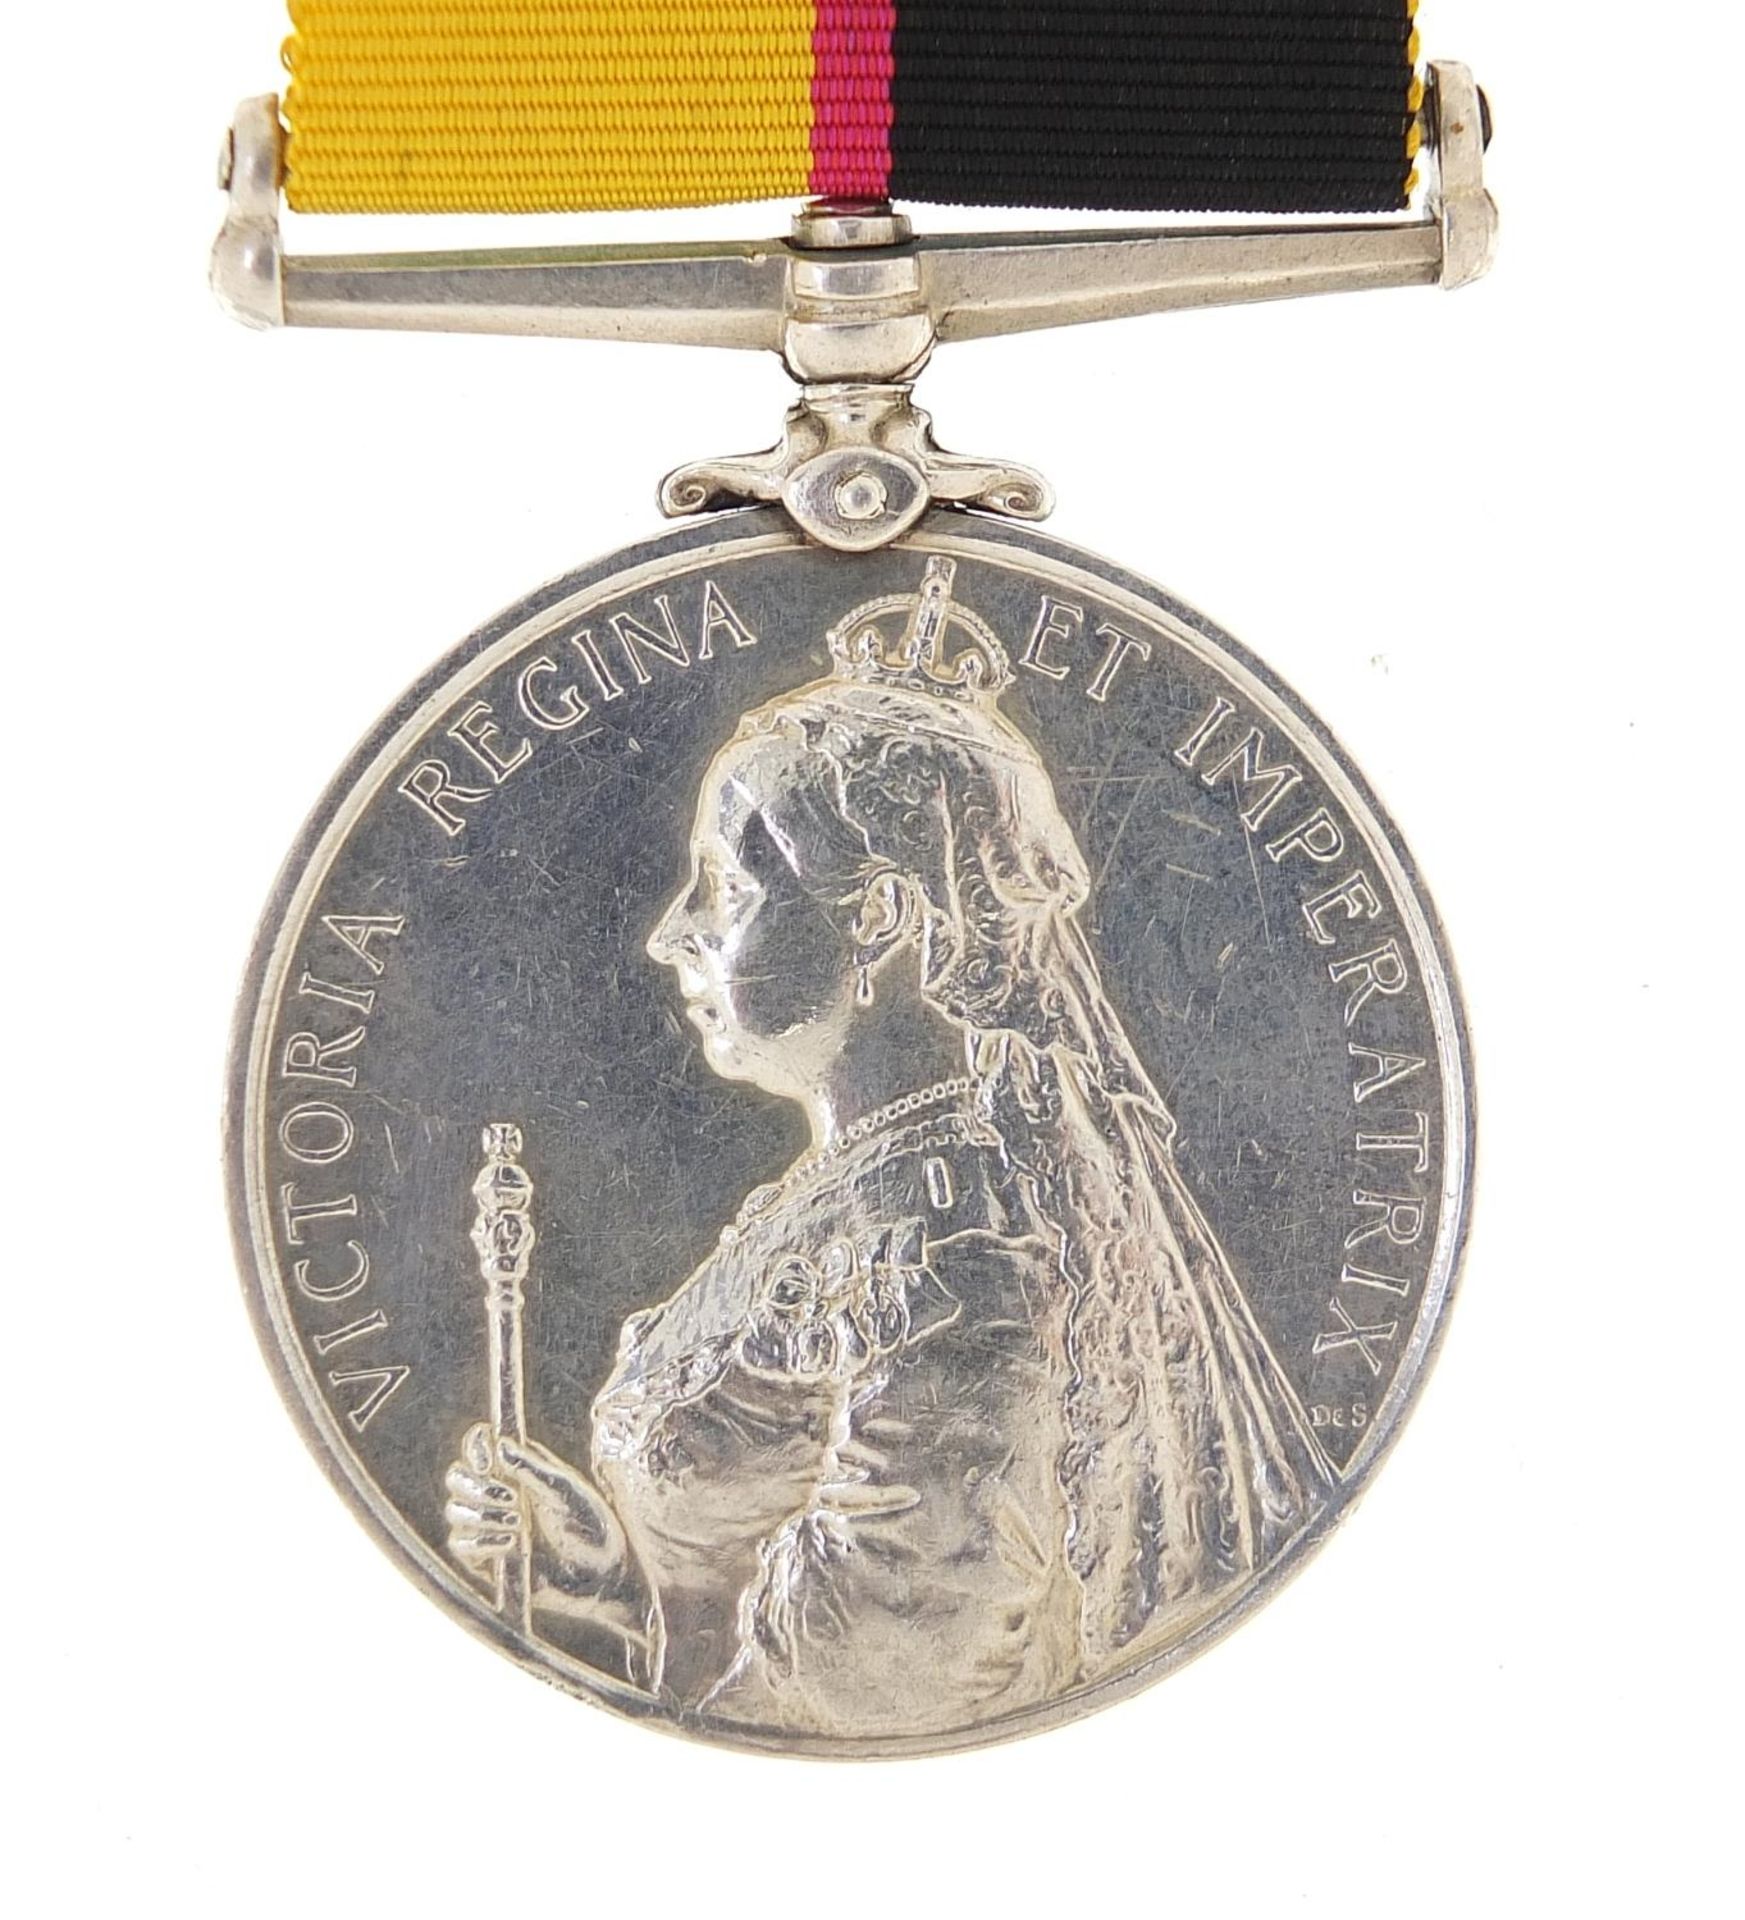 Victorian British military Sudan medal awarded to 3790.PTE.KENNEDY.2/LAN:FUS: :For Further Condition - Image 2 of 4